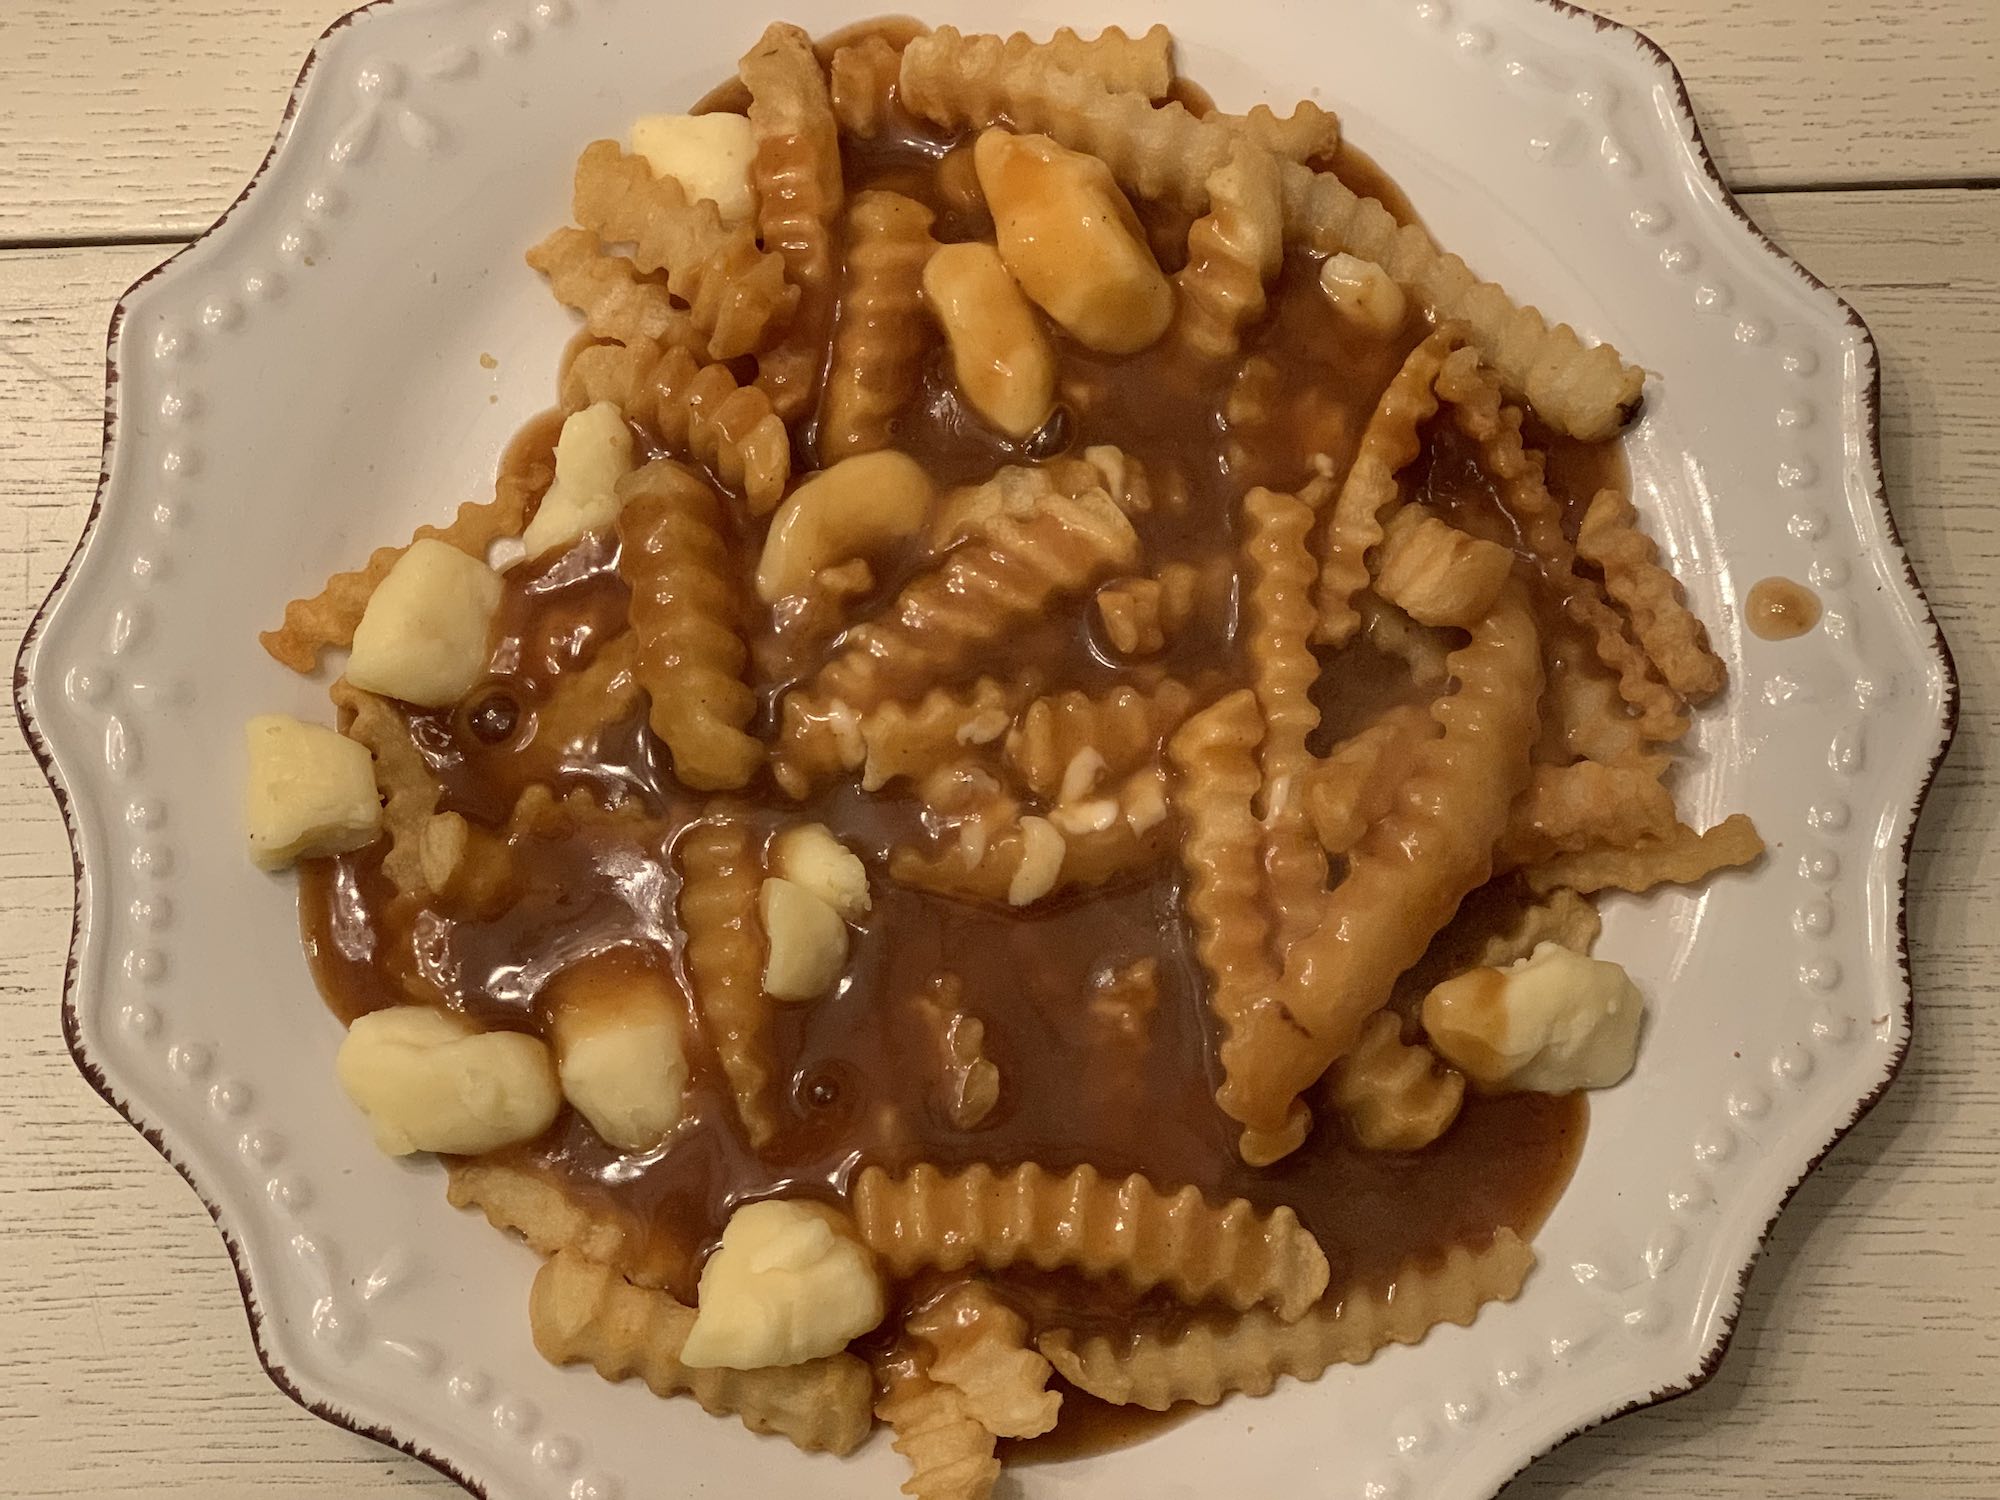 Poutine made in Breville Air fry